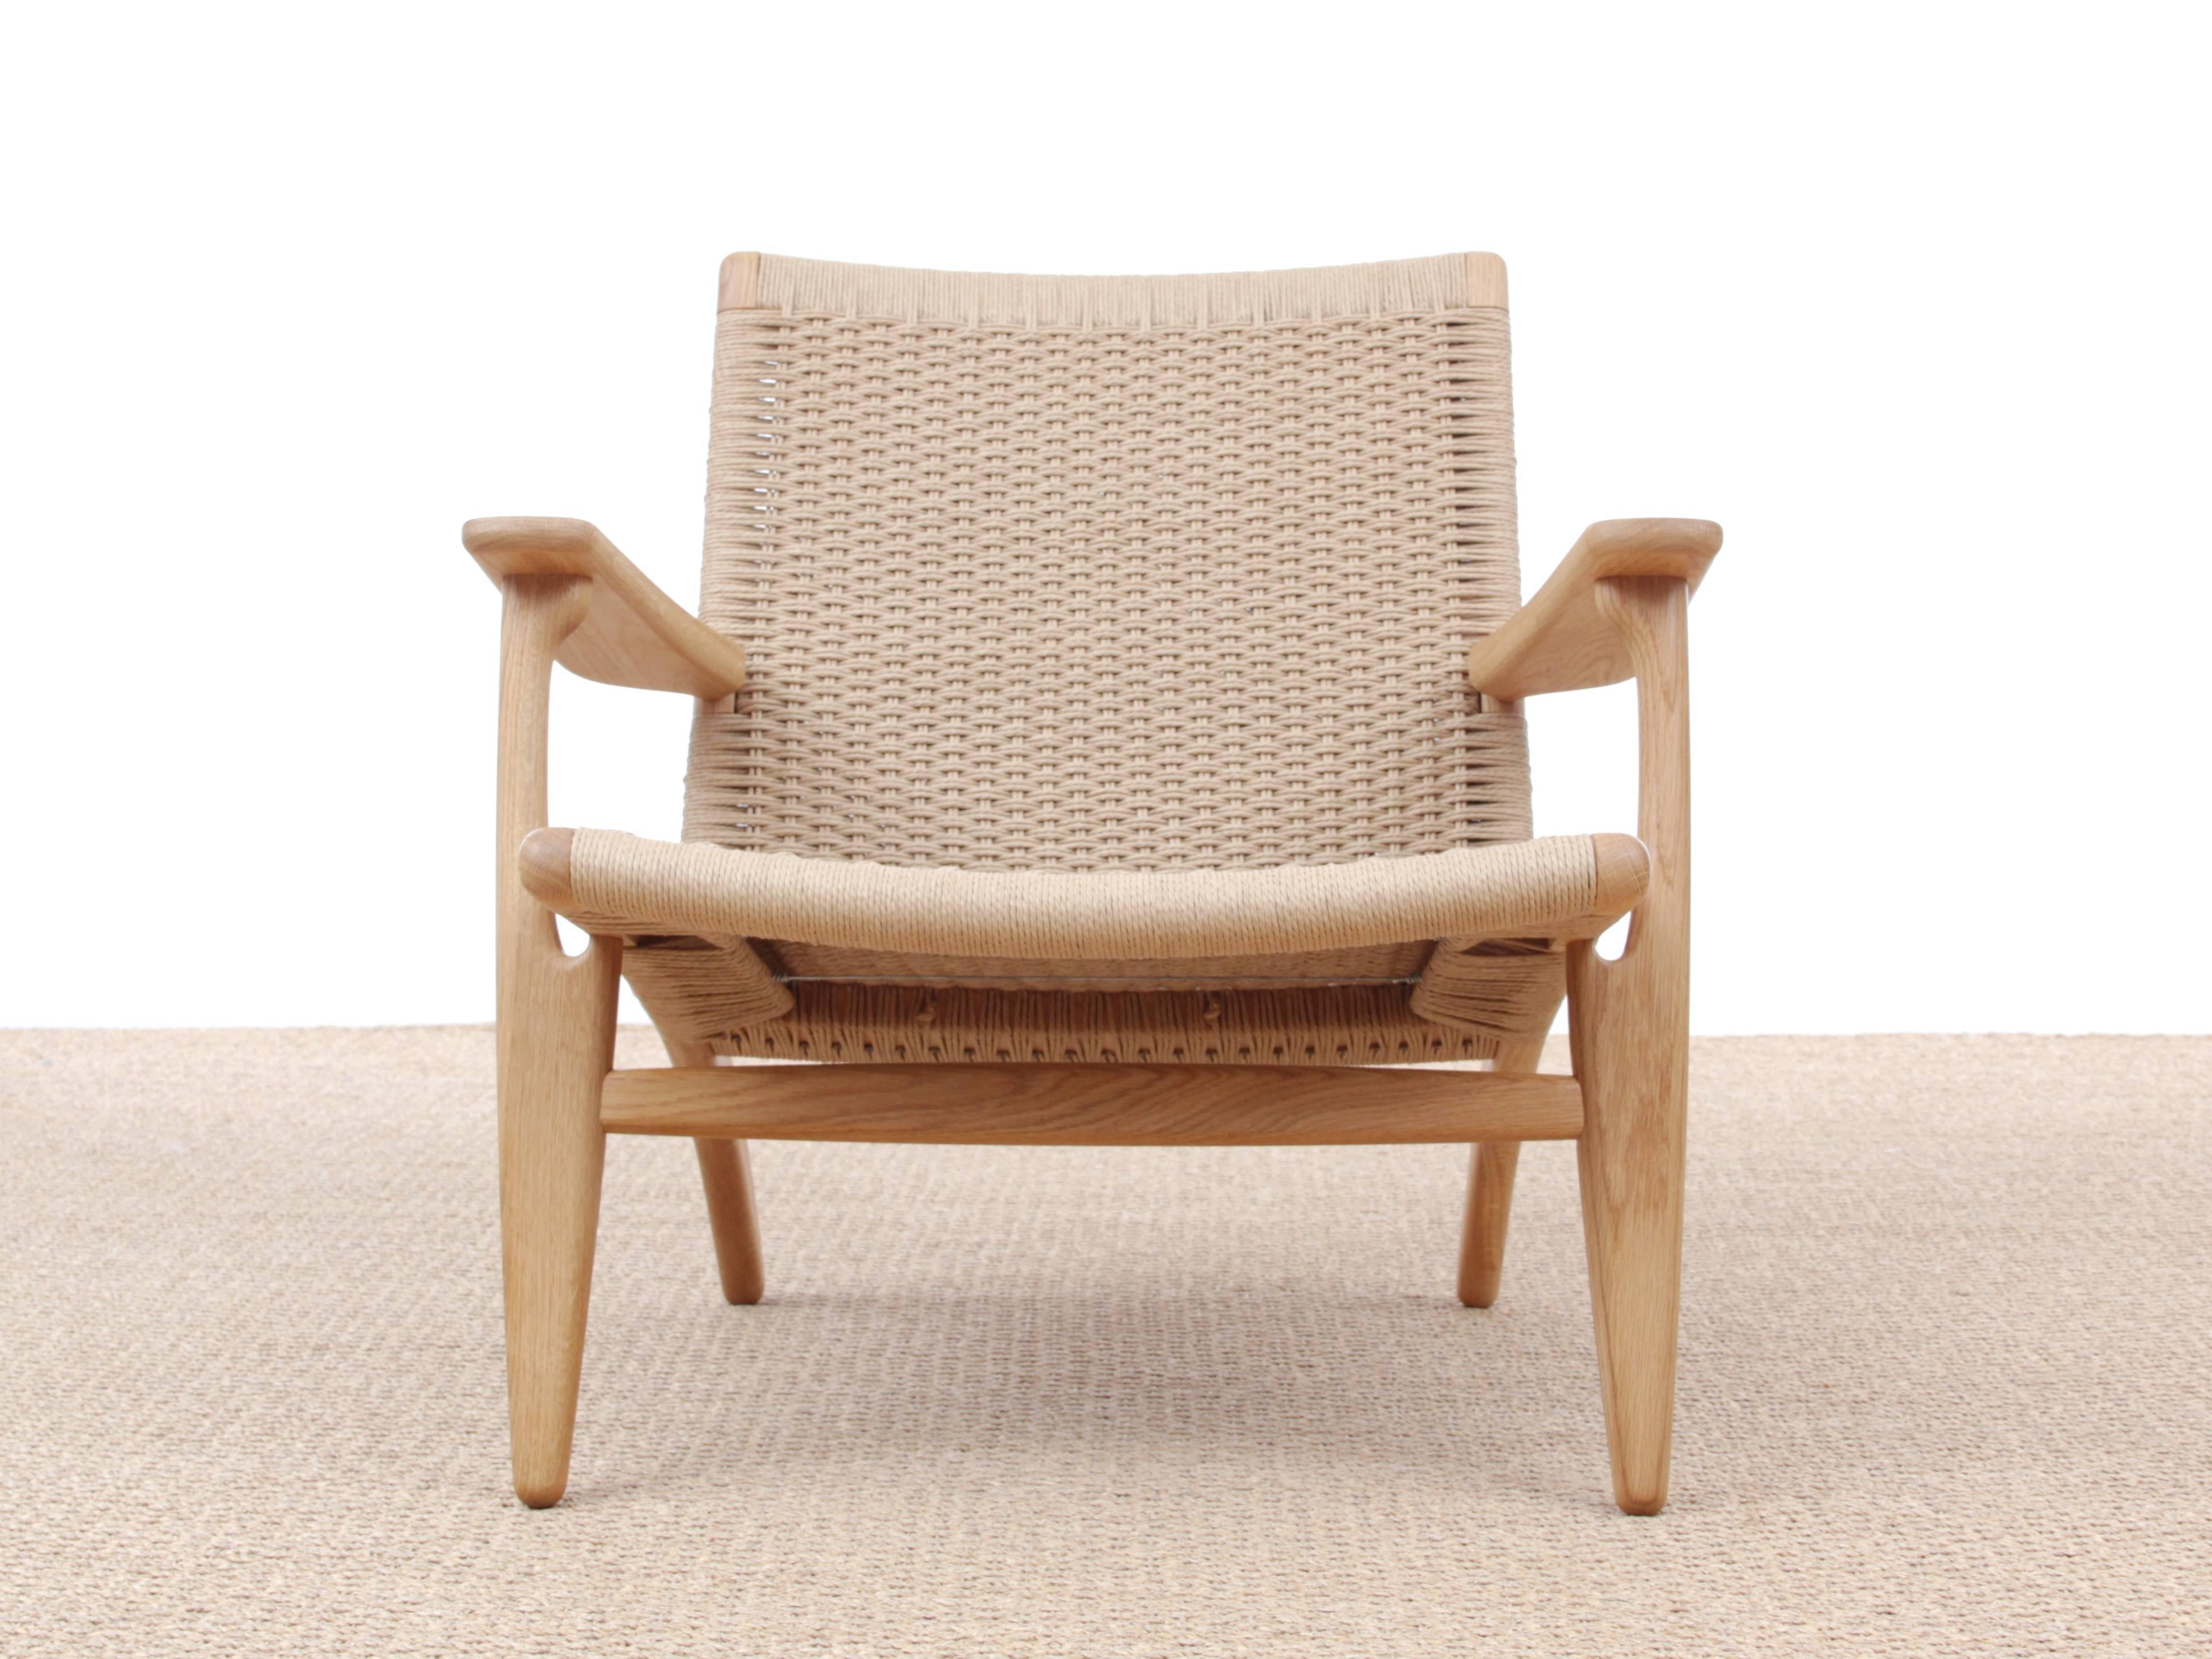 Mid-Century Modern CH 25 armchair by Hans Wegner. New product. Designed in 1950, the CH25 lounge chair was one of the first four chairs Hans J. Wegner created especially for Carl Hansen & Søn within his first three weeks with the company. The CH25